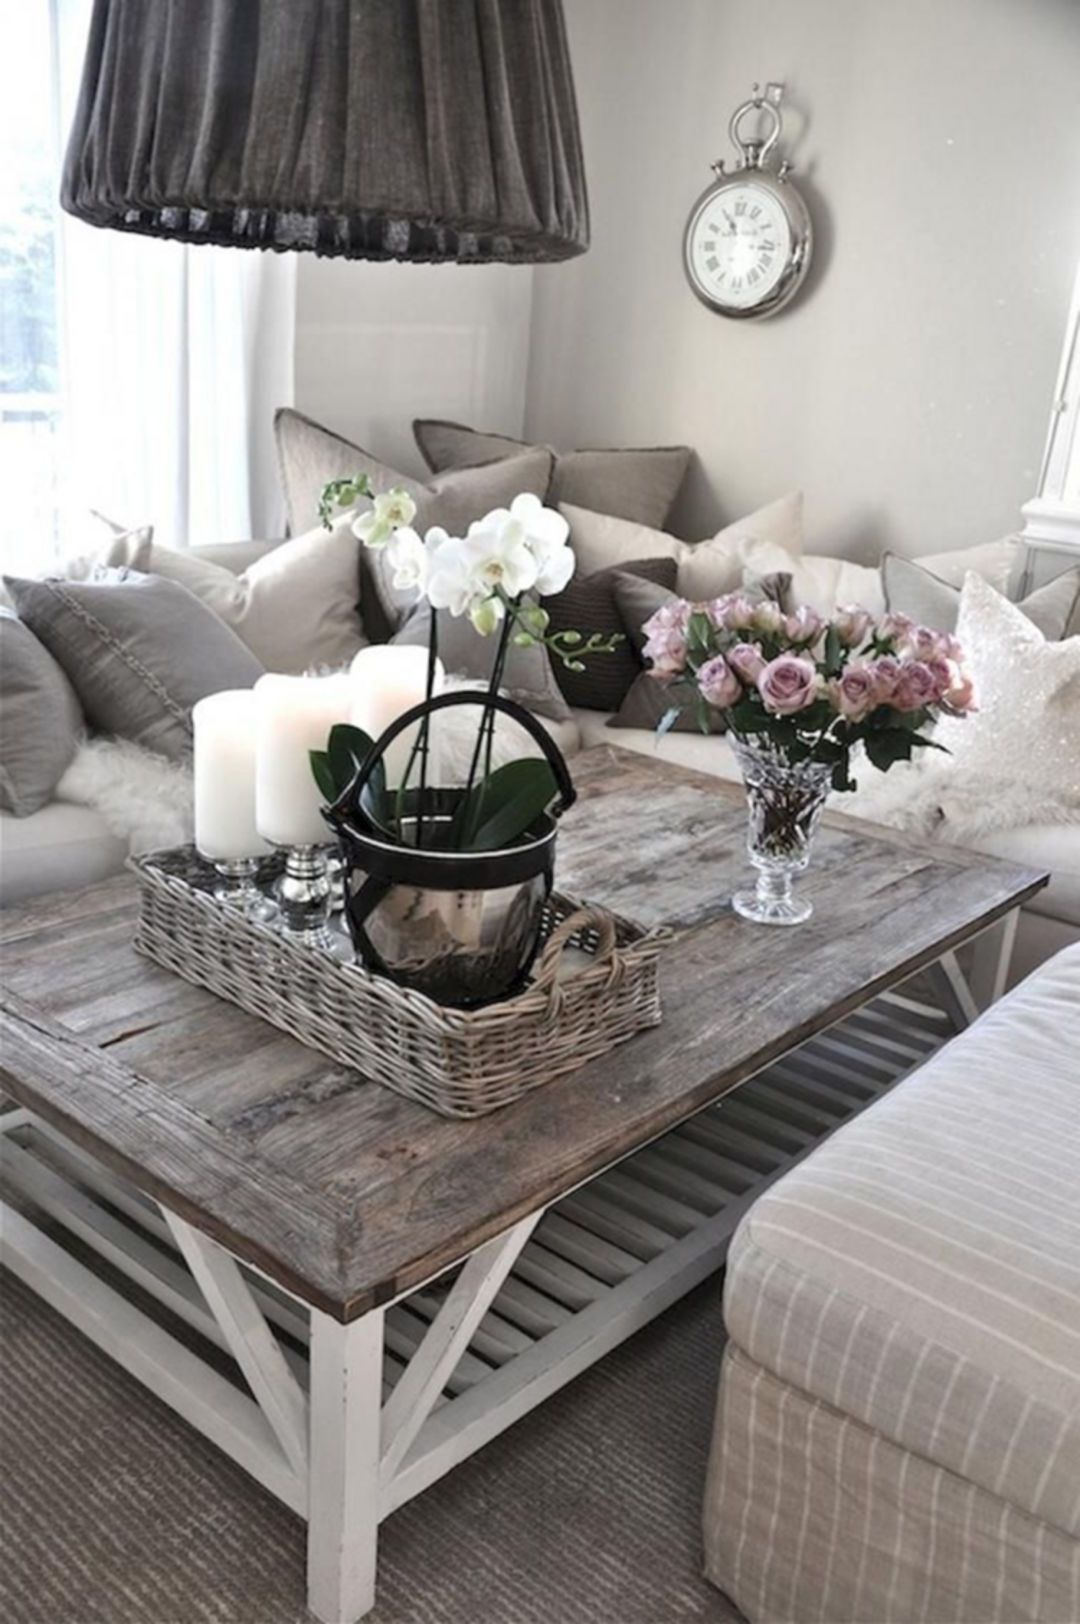 Adorable 25+ Great Farmhouse Coffee Table Design And Decor Ideas Https Within Living Room Farmhouse Coffee Tables (Gallery 3 of 20)